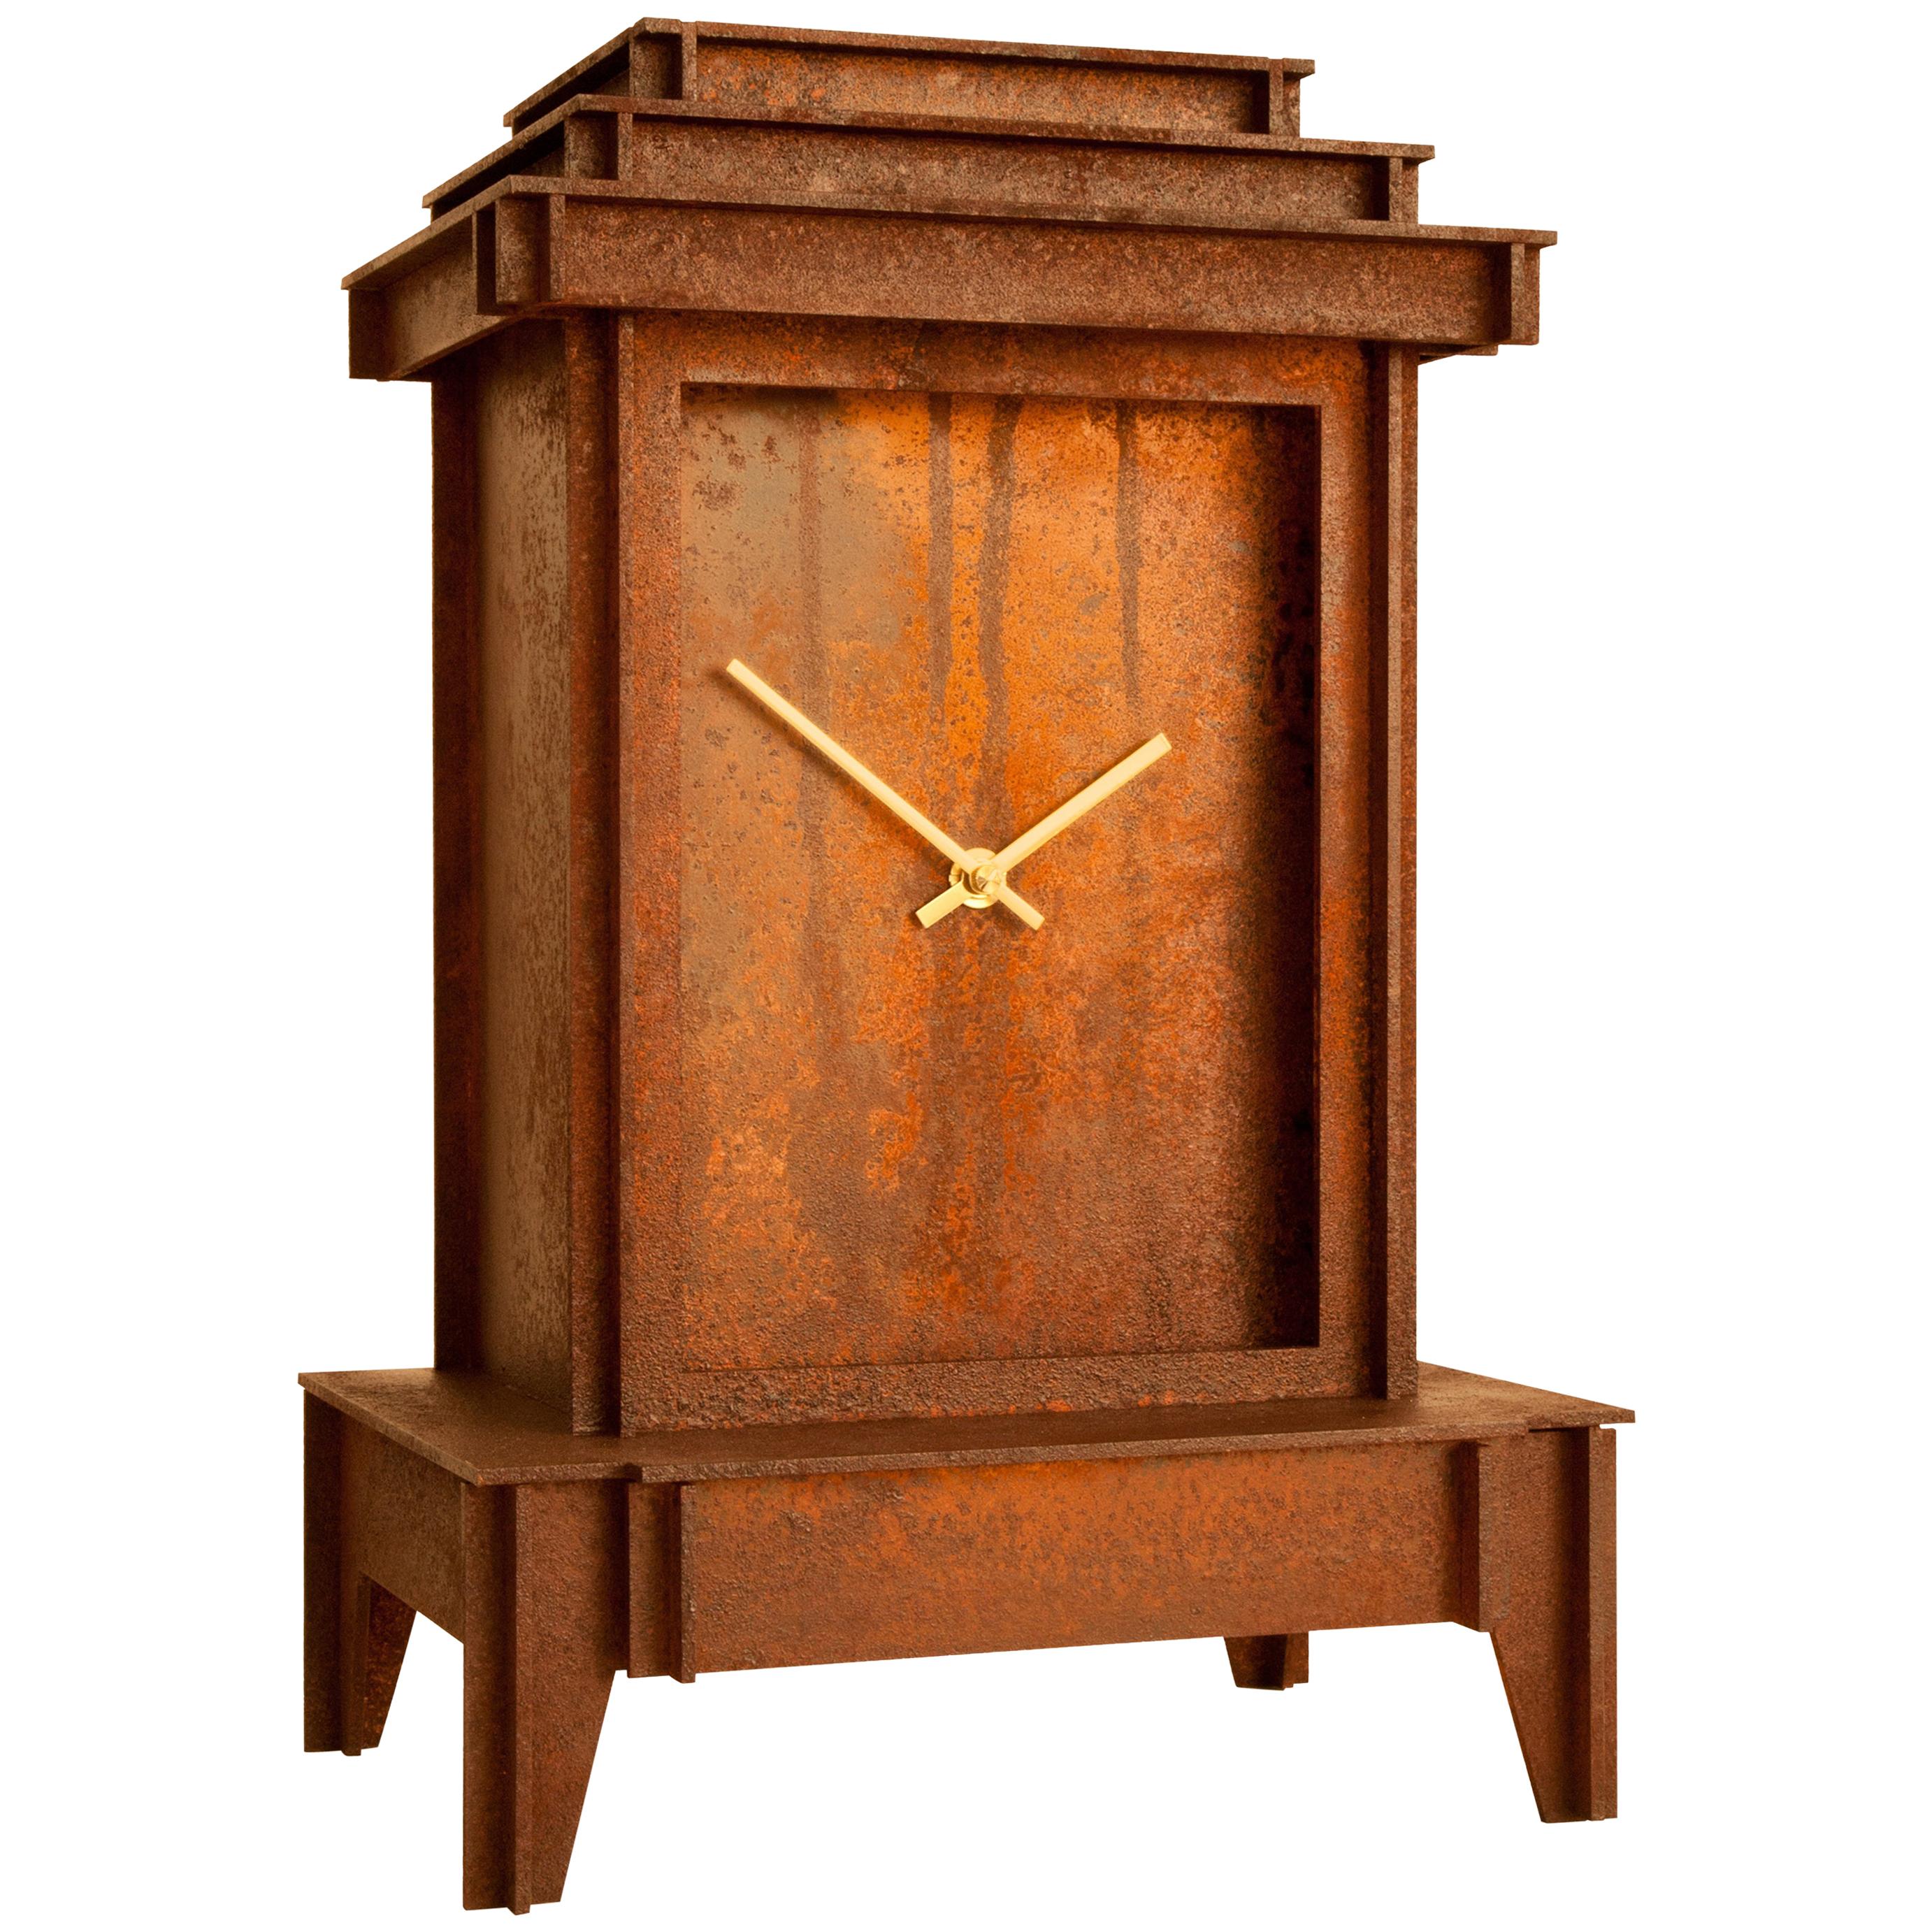 NSNG One More Time Clock Rusted Corten For Sale